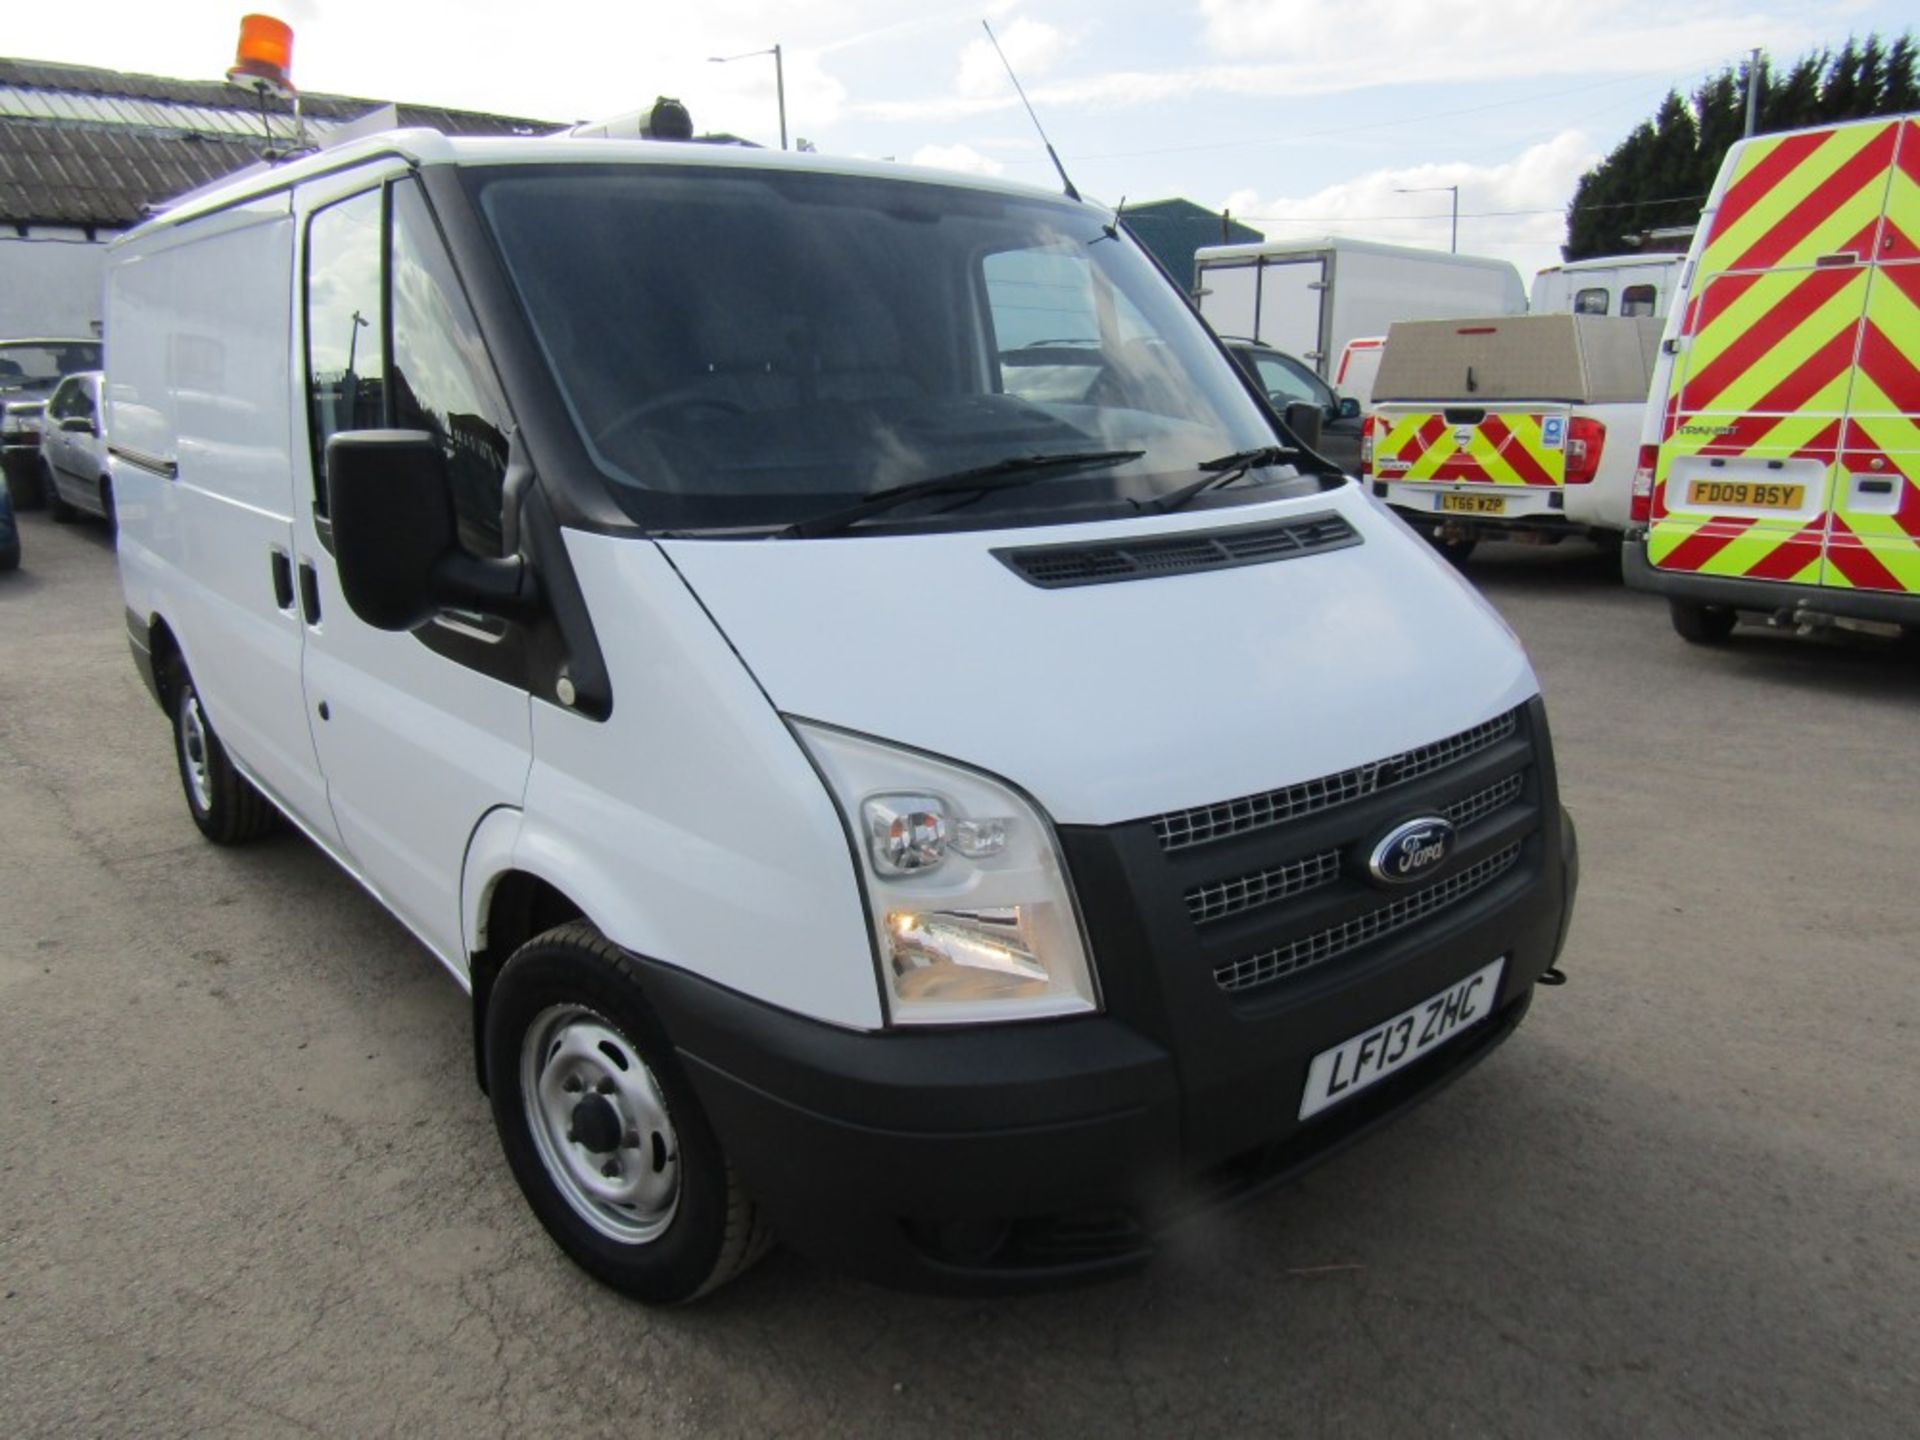 13 reg FORD TRANSIT 100 T300 FWD, 1ST REG 03/13, 99426M WARRANTED, V5 HERE, 1 OWNER FROM